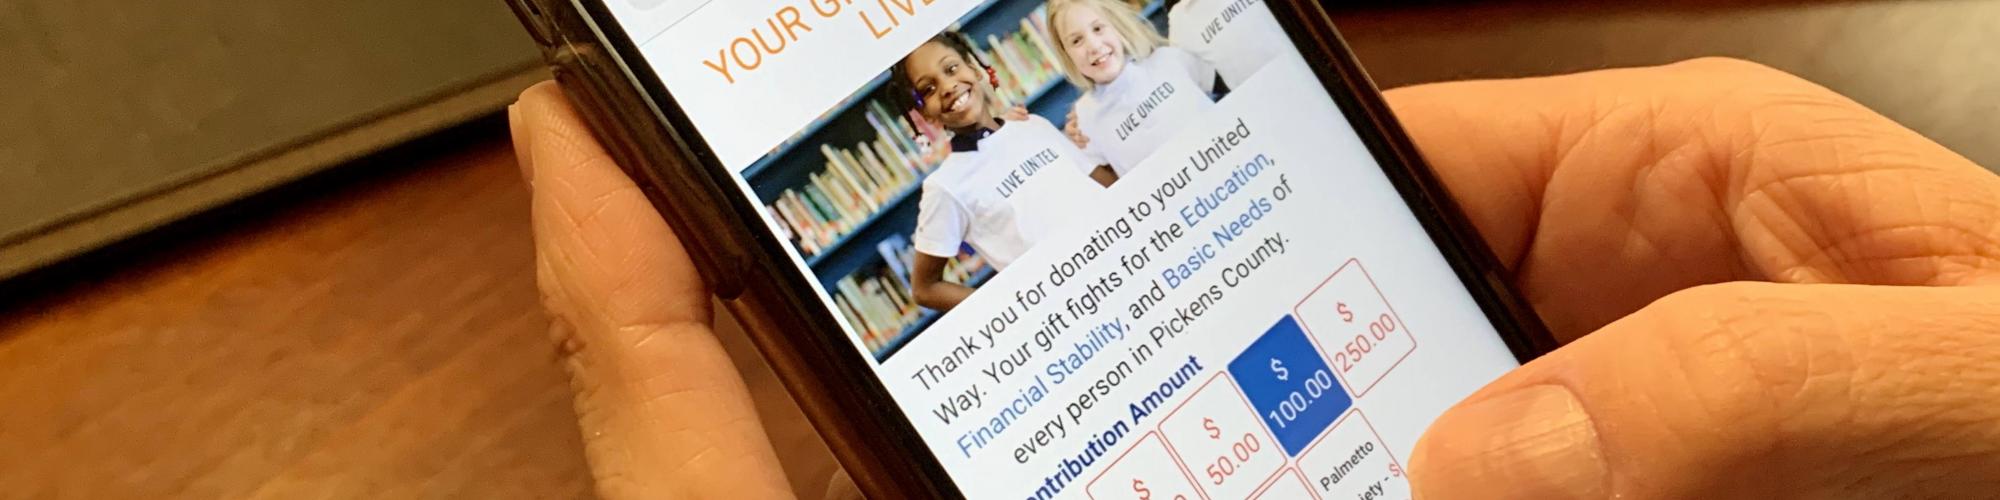 Person holding a phone opened to the donation page